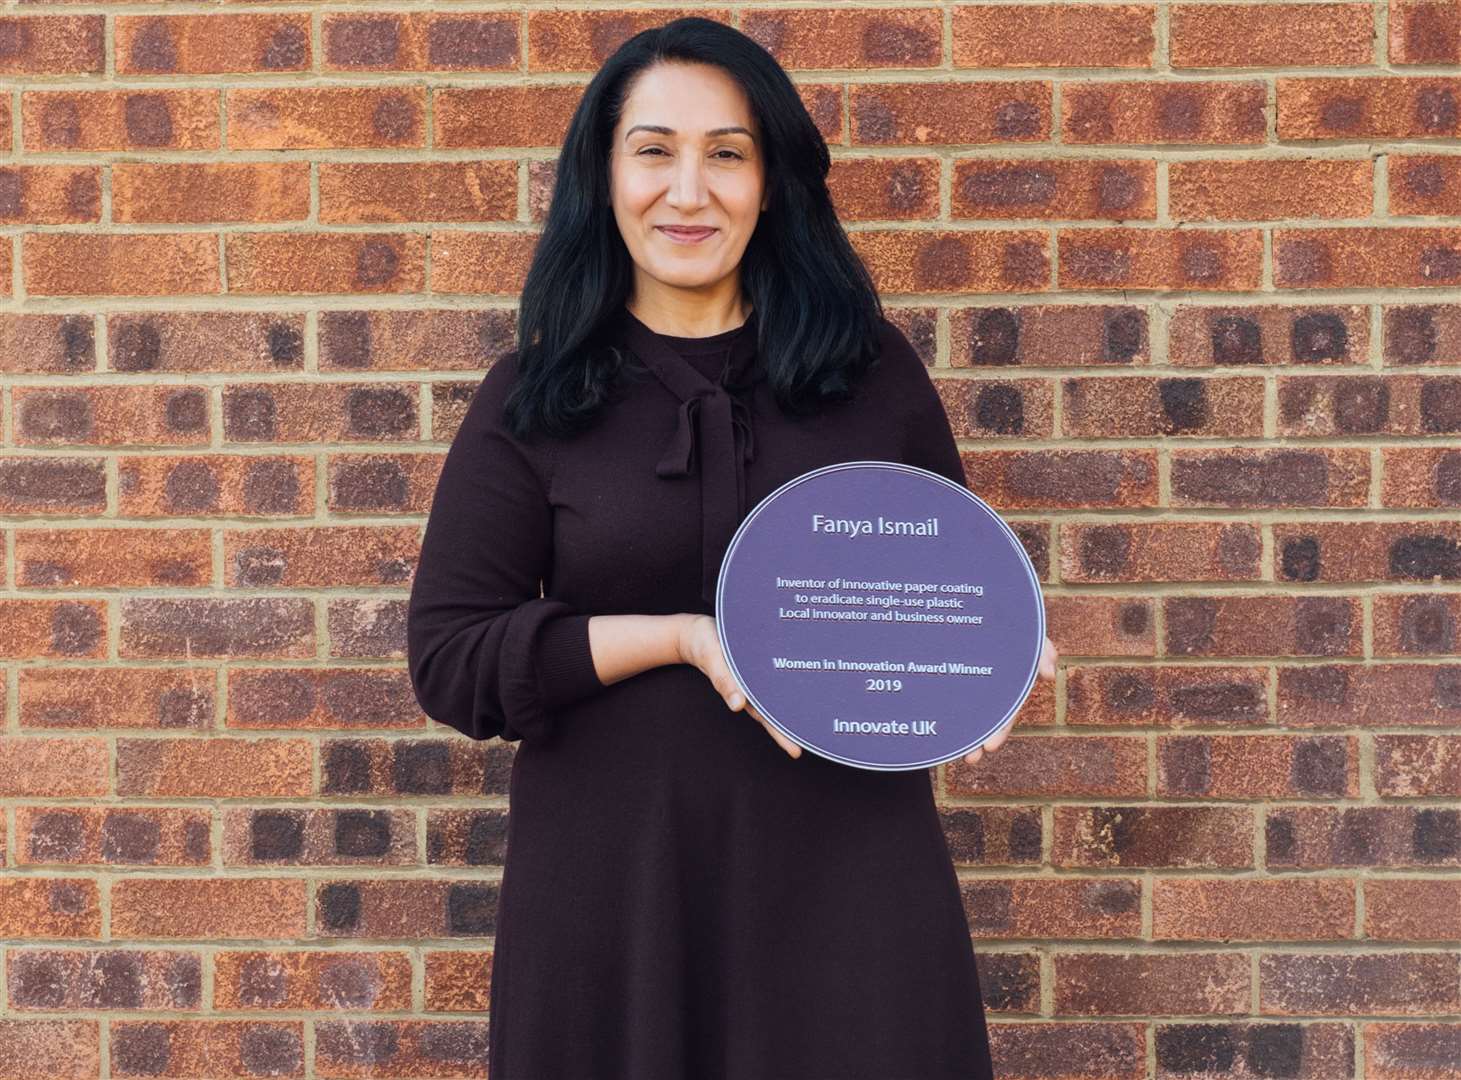 Fanya Ismail holing a blue plaque from Innovate UK. Picture by Jennifer McCord (7647176)